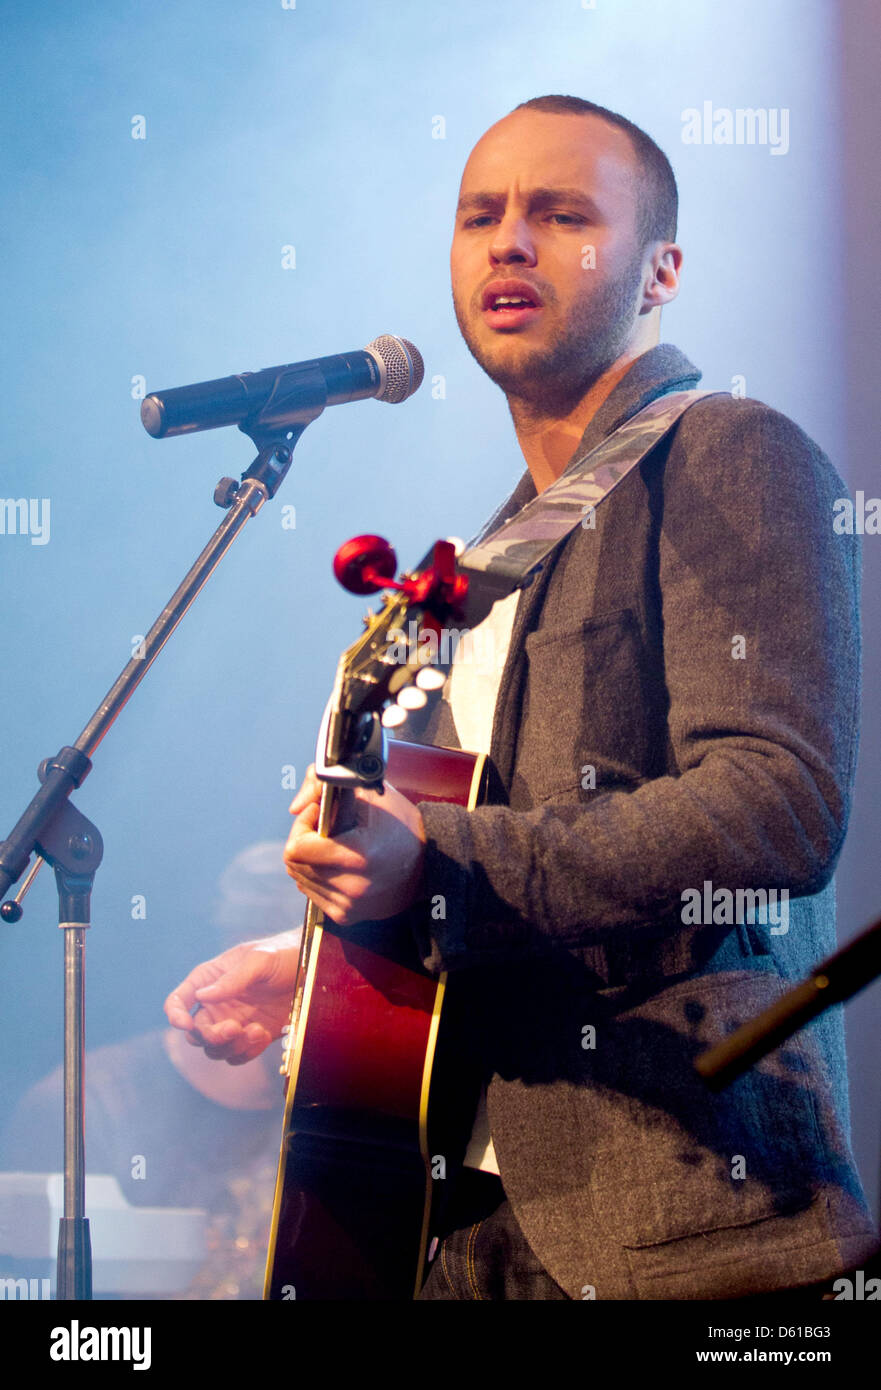 British singer and song writer Marlon Roudette performs during a concert at the DasCann venue in Stuttgart, Germany, 14 April 2012. Photo: Thomas Niedermüller Stock Photo